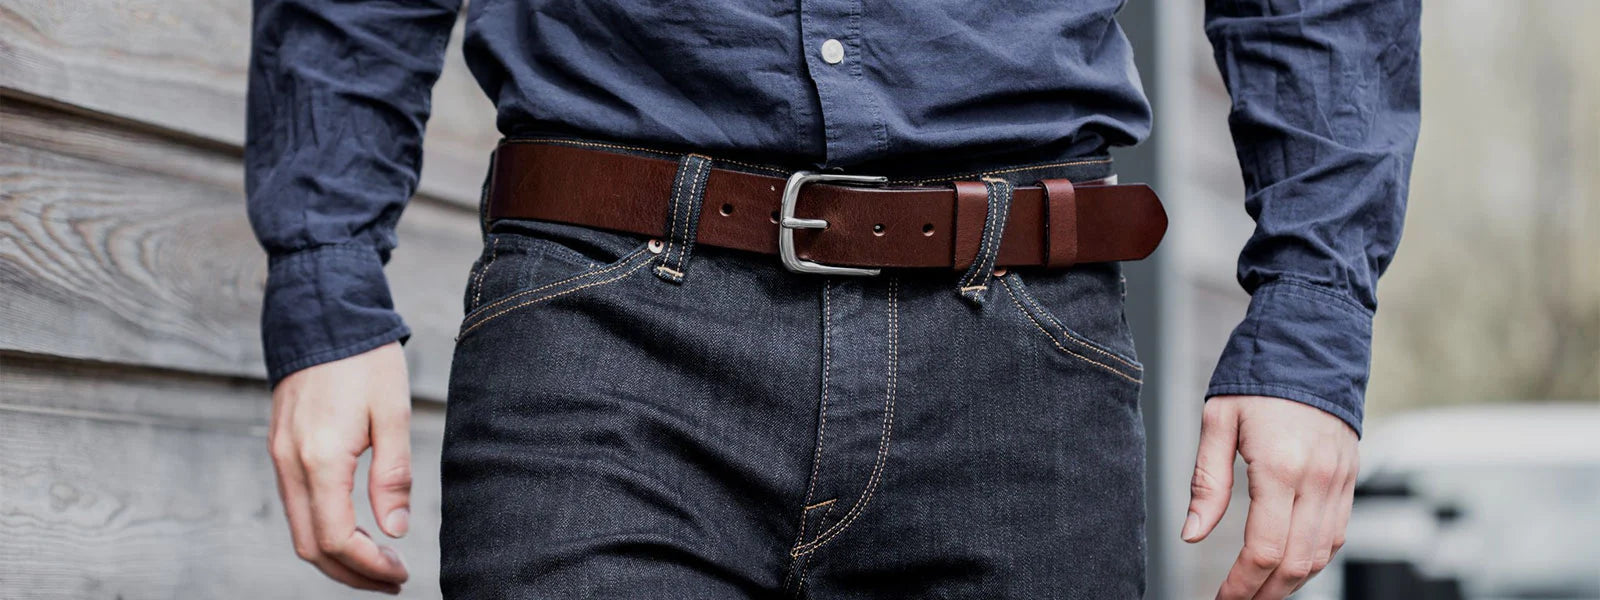 Discovering the Top Leathers for Durable and Stylish Belts